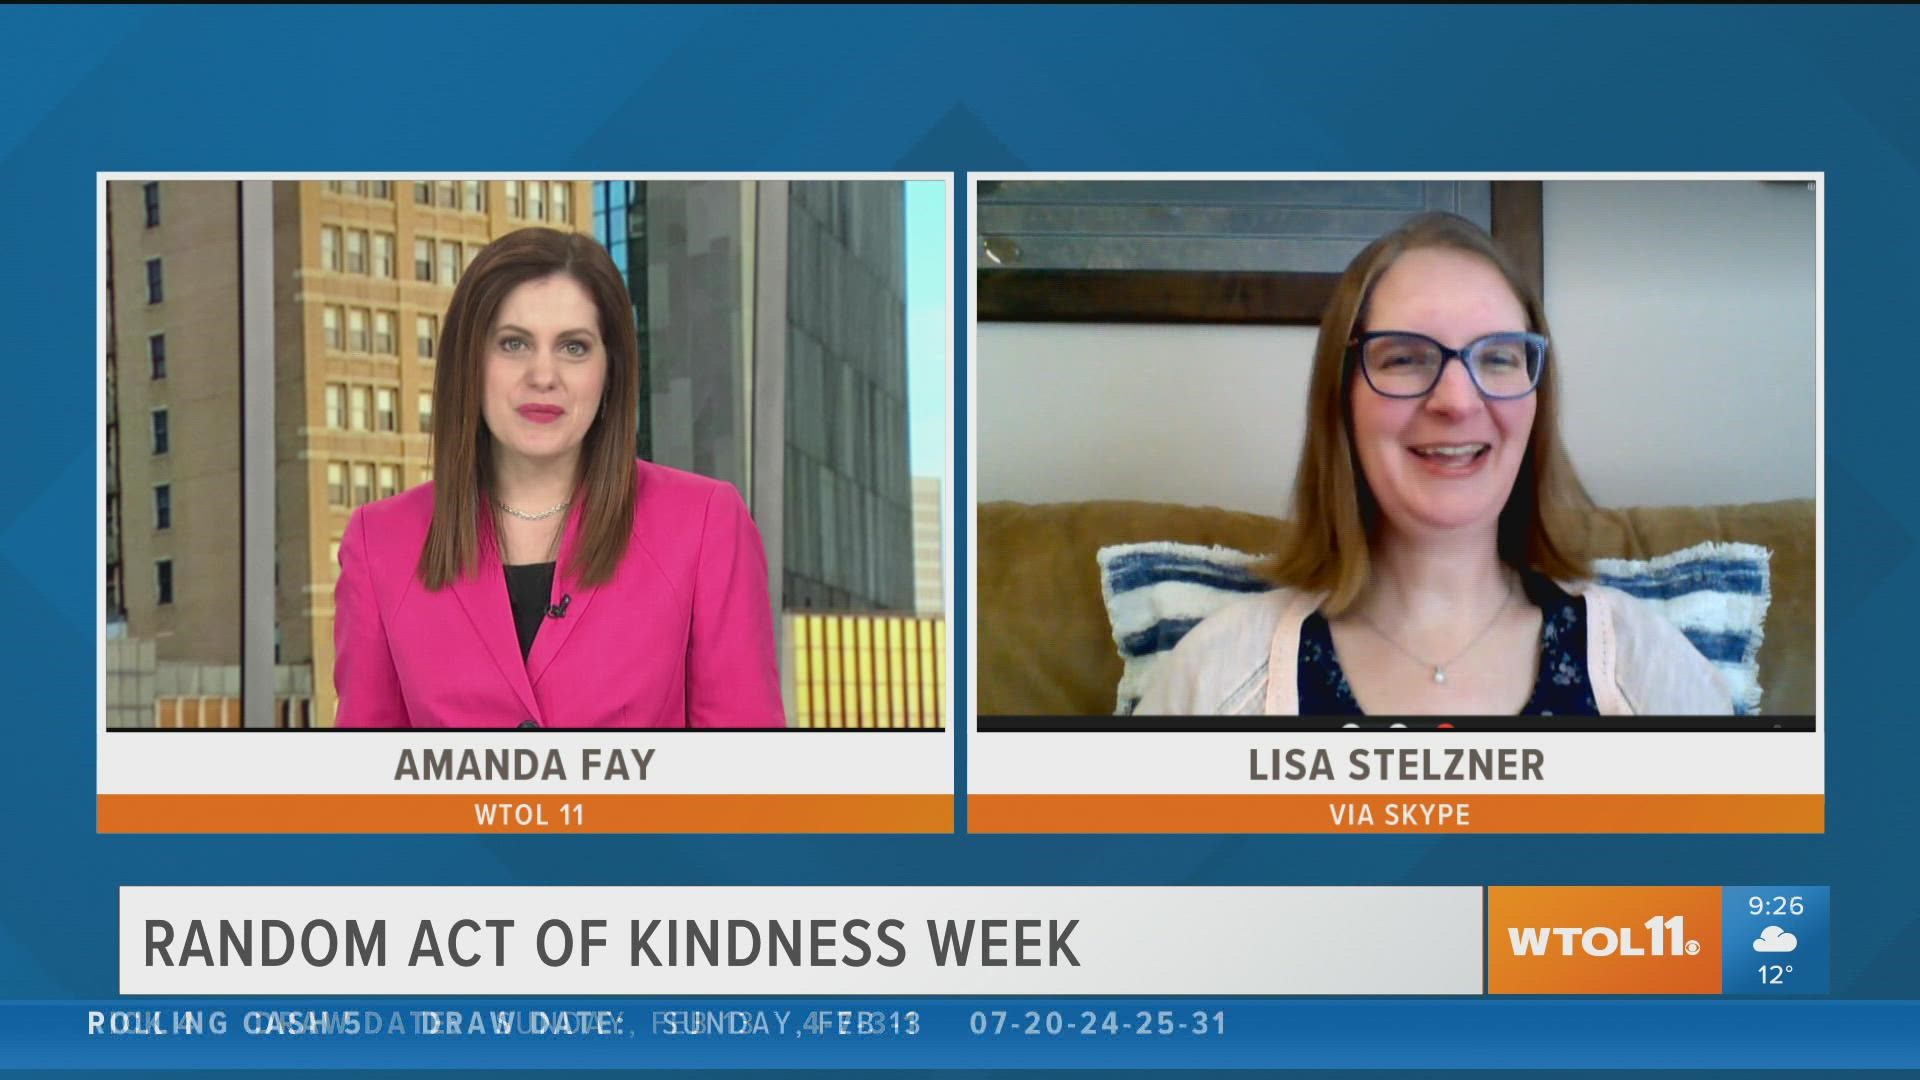 Lisa Stelzner  from the Mothers' Center of Greater Toledo shares ideas for Random Acts of Kindness Week